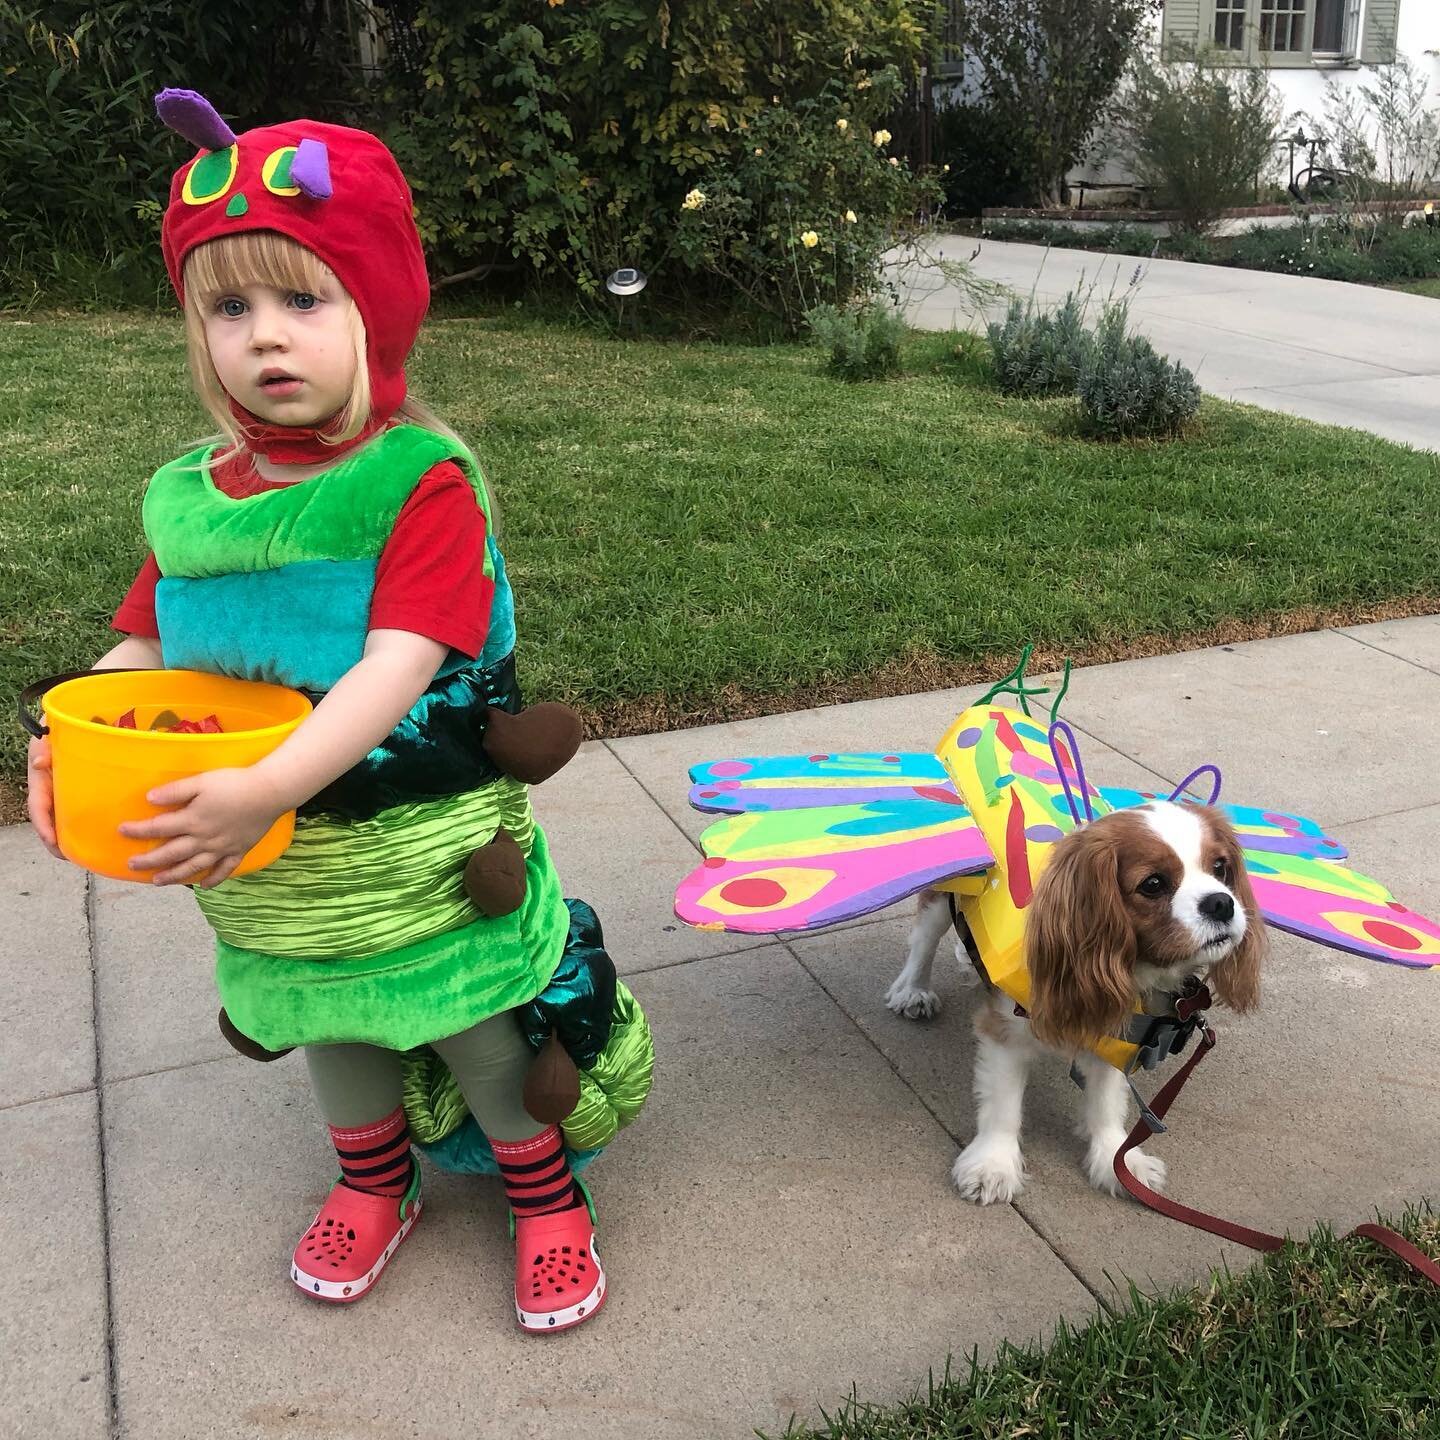 A Very Hungry Caterpillar and her Beautiful Butterfly 🐛🦋 #HappyHalloween @worldericcarle @officialericcarle